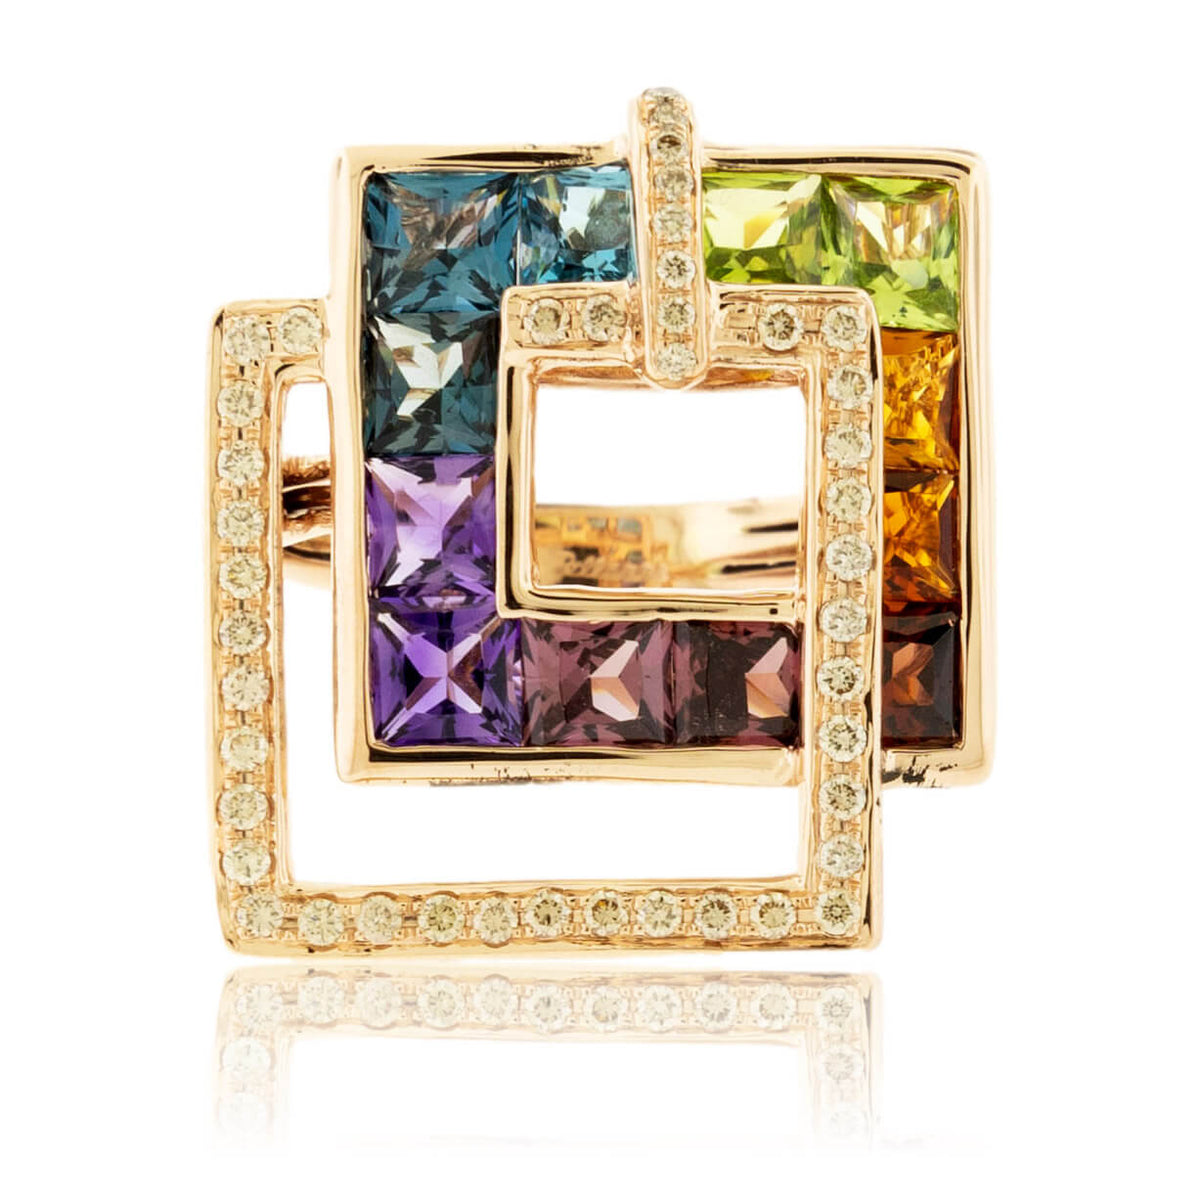 Step Cut Mixed Gemstone Rainbow Double Square Ring - Park City Jewelers